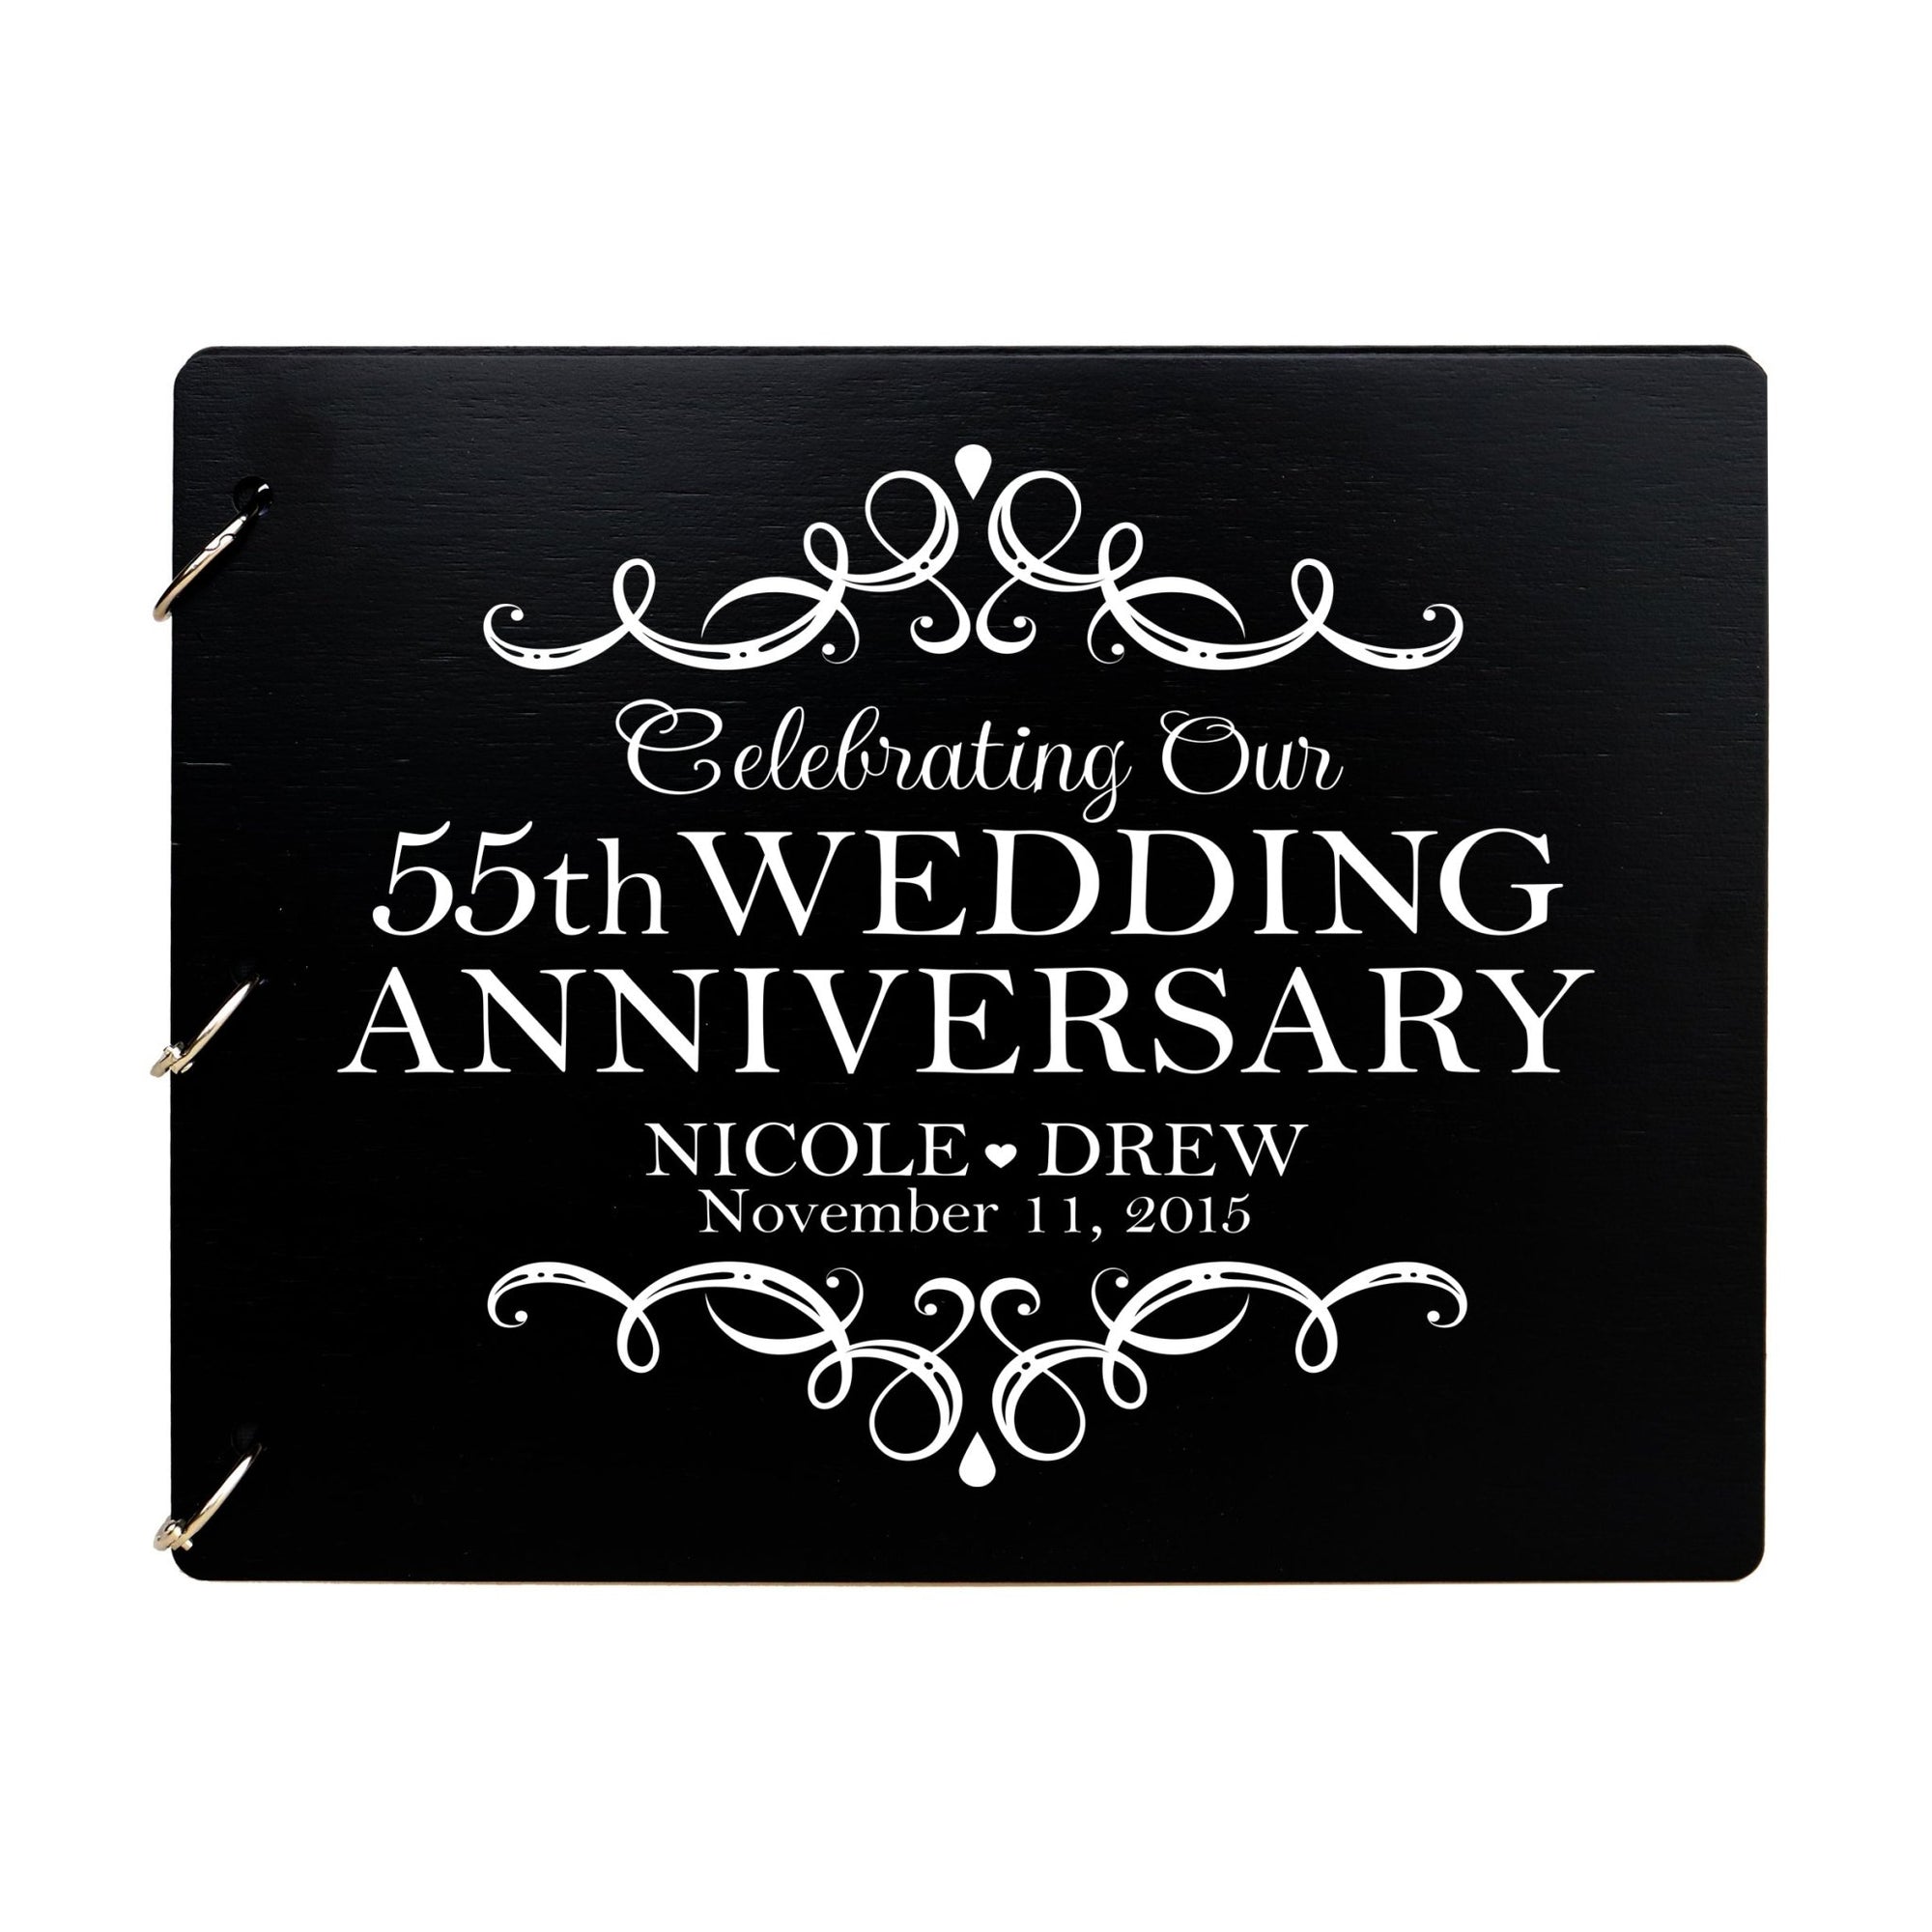 Personalized Guest Book Sign for 55th Wedding Anniversary - Celebrating - LifeSong Milestones